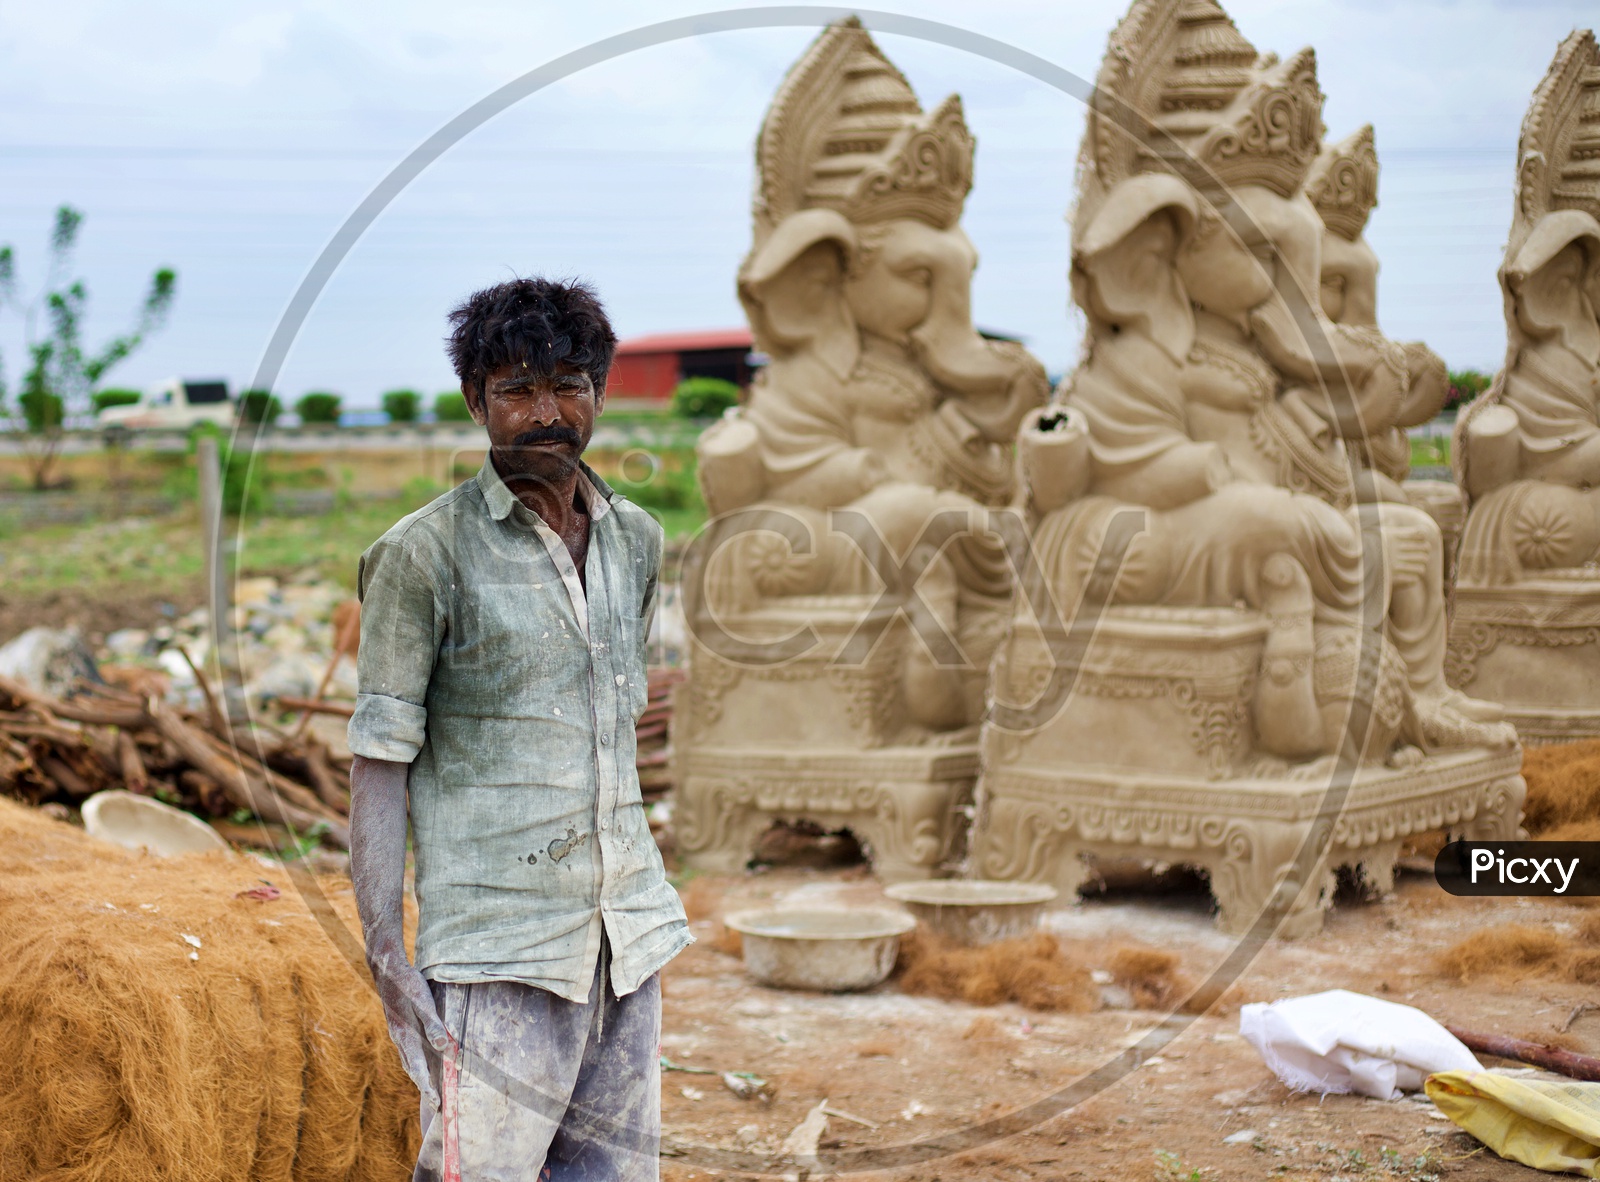 A worker who makes statues.